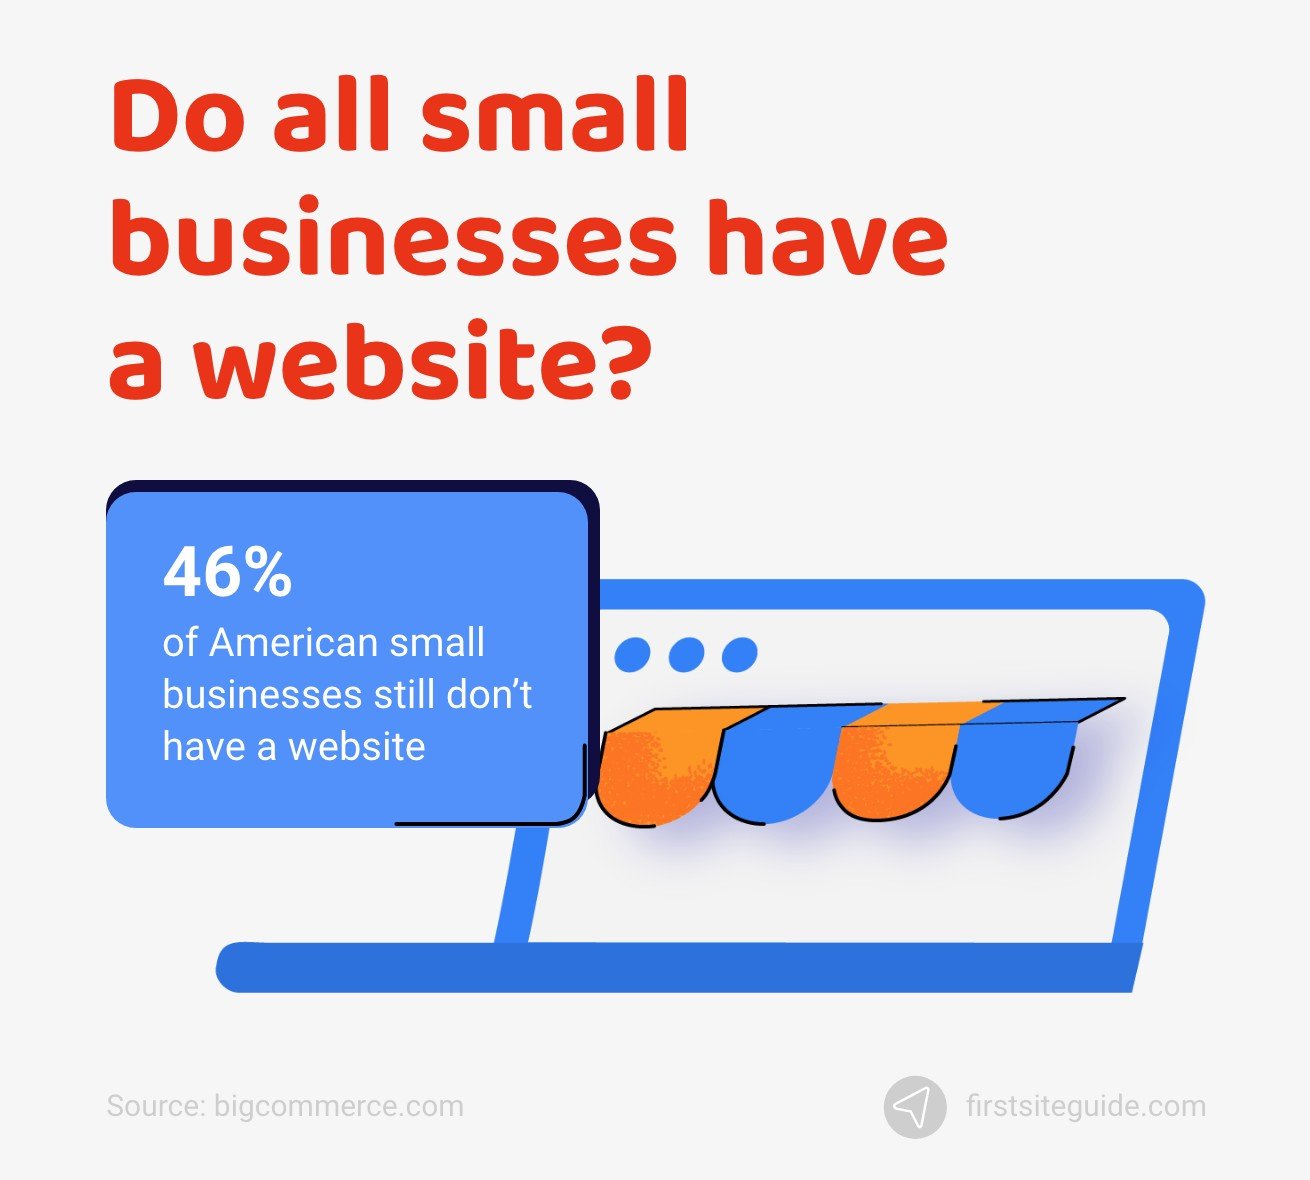 Do all small businesses have a website?